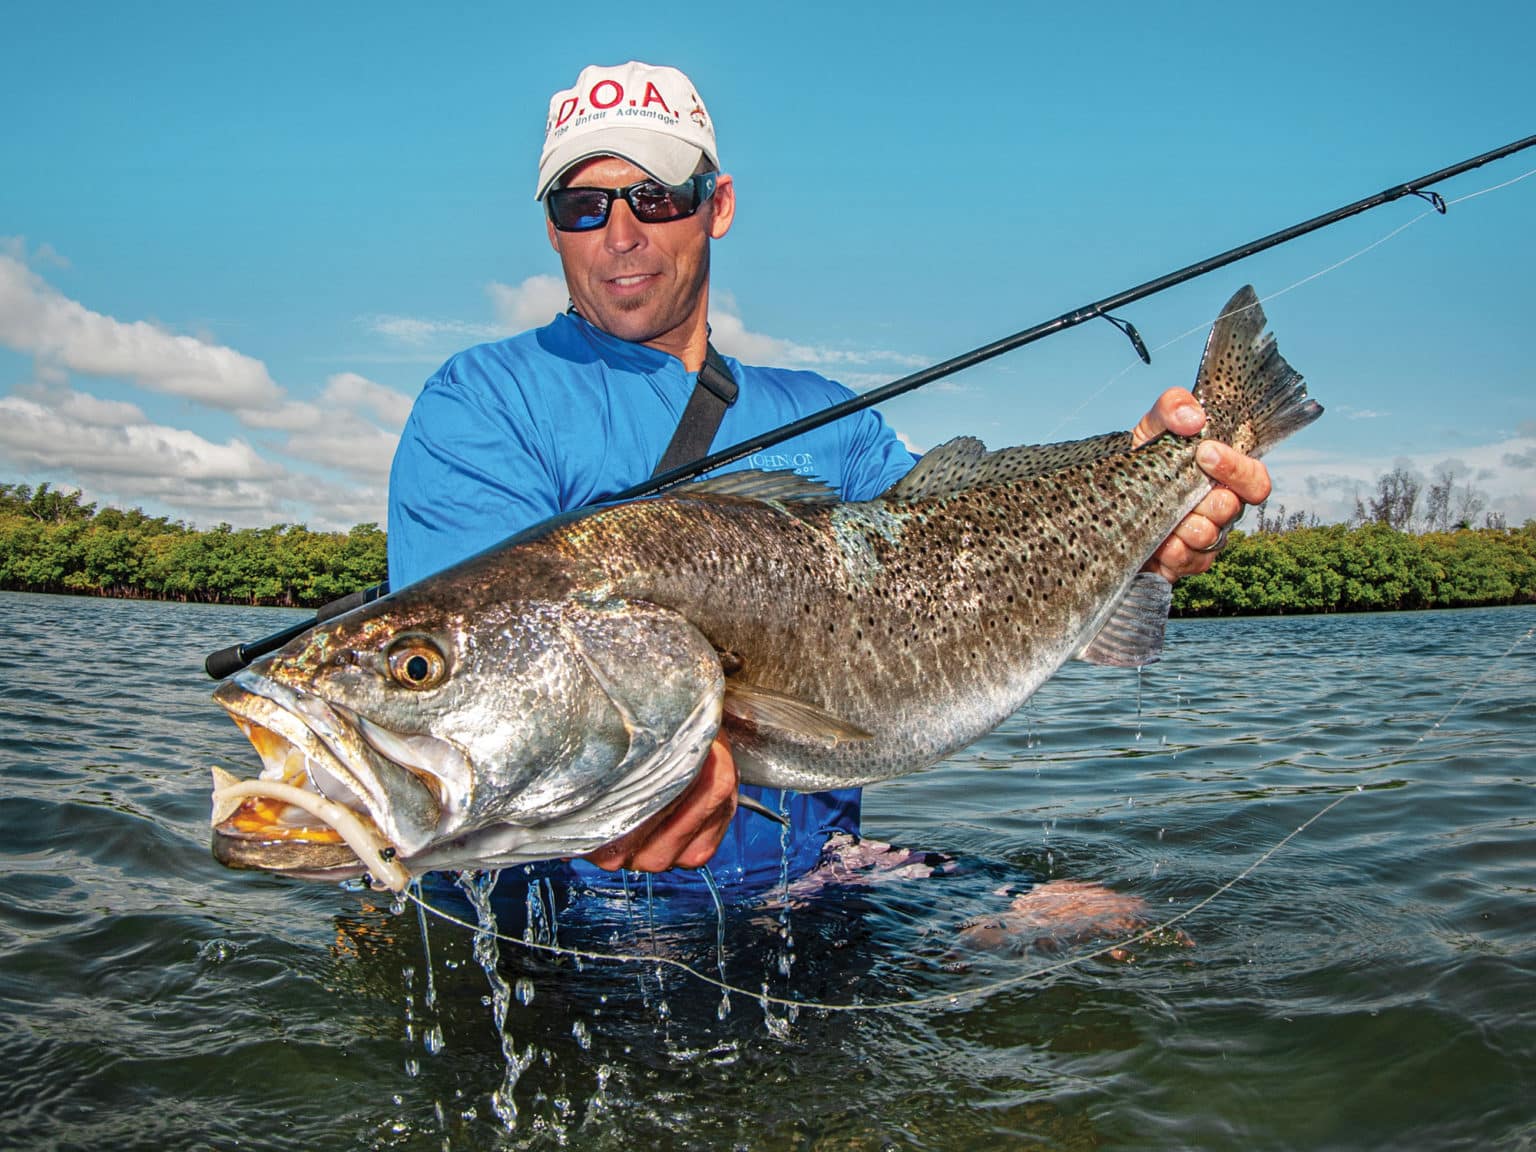 Seven Top Tips for Landing Large Seatrout